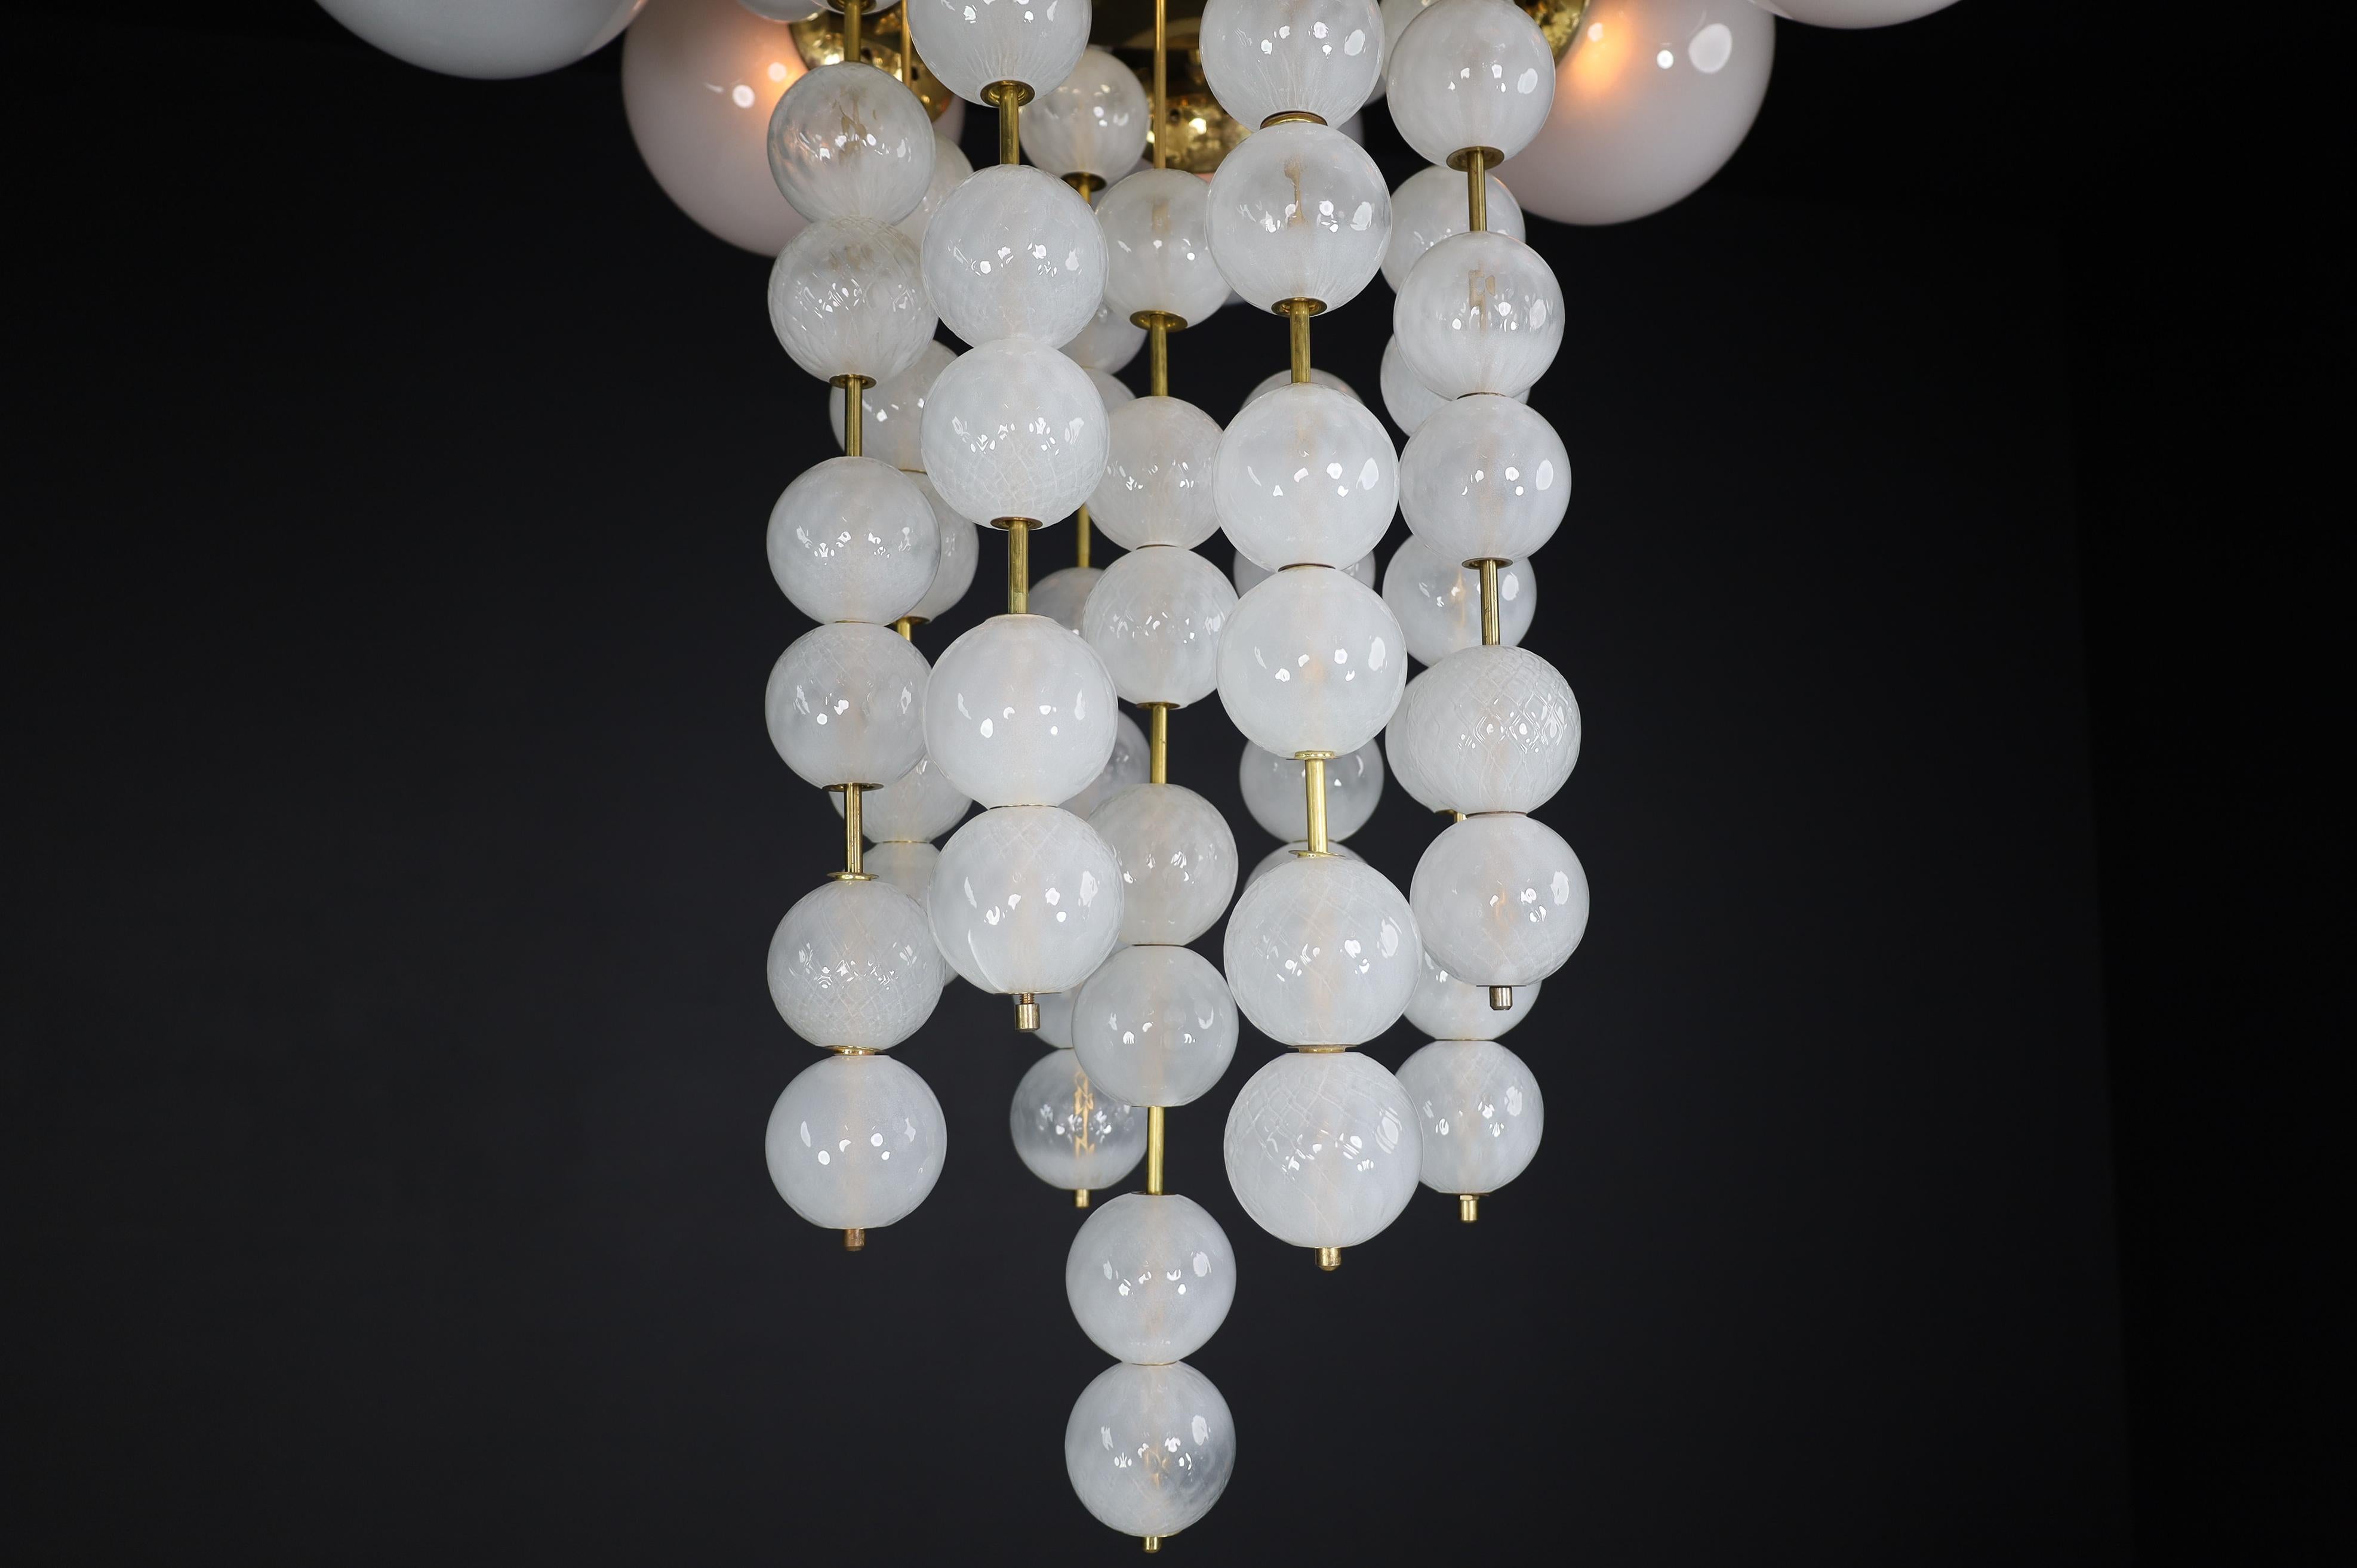 Grand Chandelier with Brass Fixture and Hand-blowed Frosted Glass Globes, 1960s For Sale 5